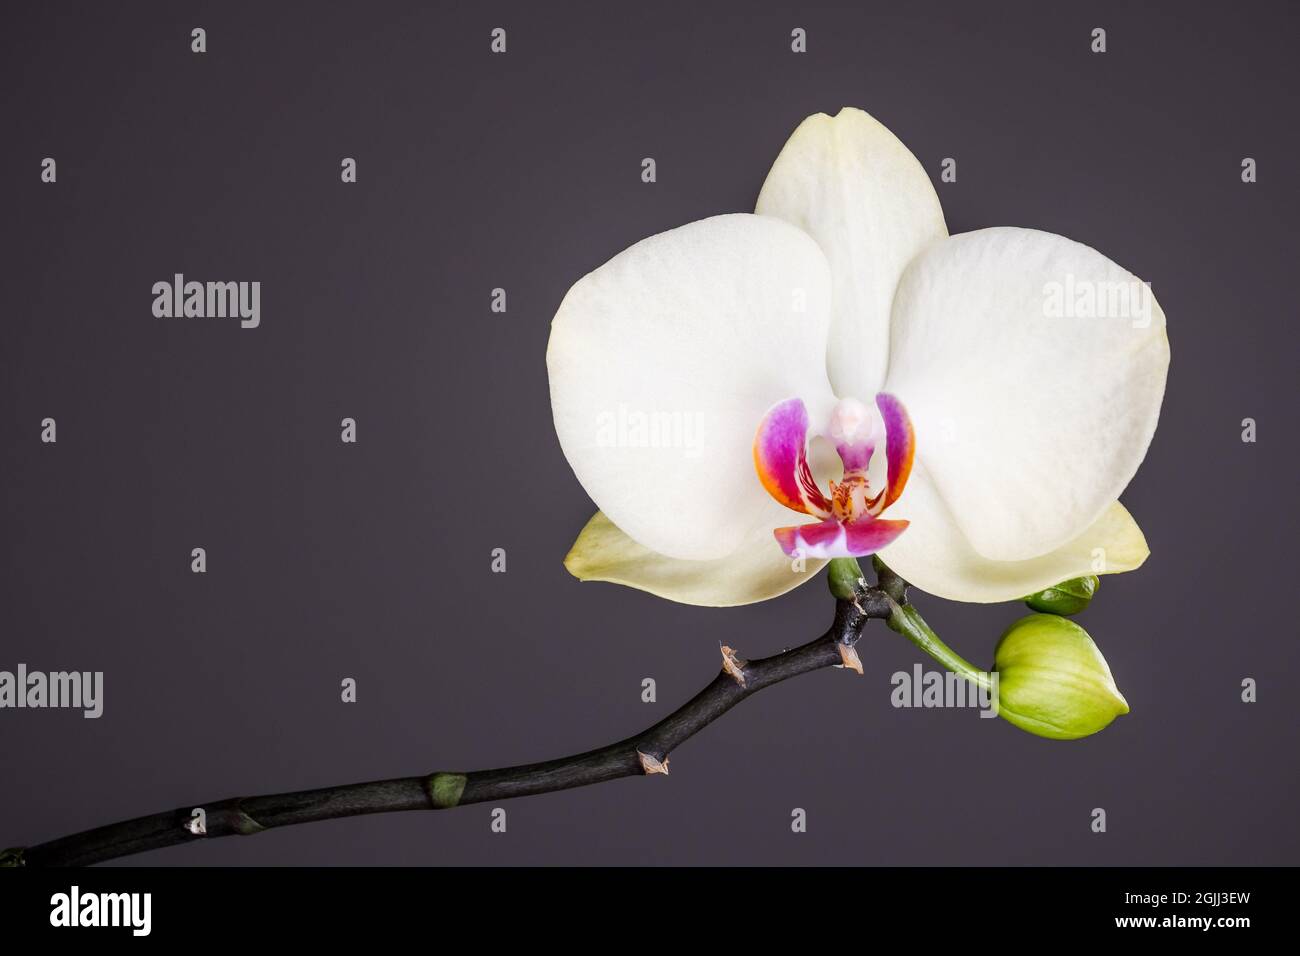 Orchidaceae, still life of white orchid flowers against dark background, minimalistic fine art wallpaper Stock Photo